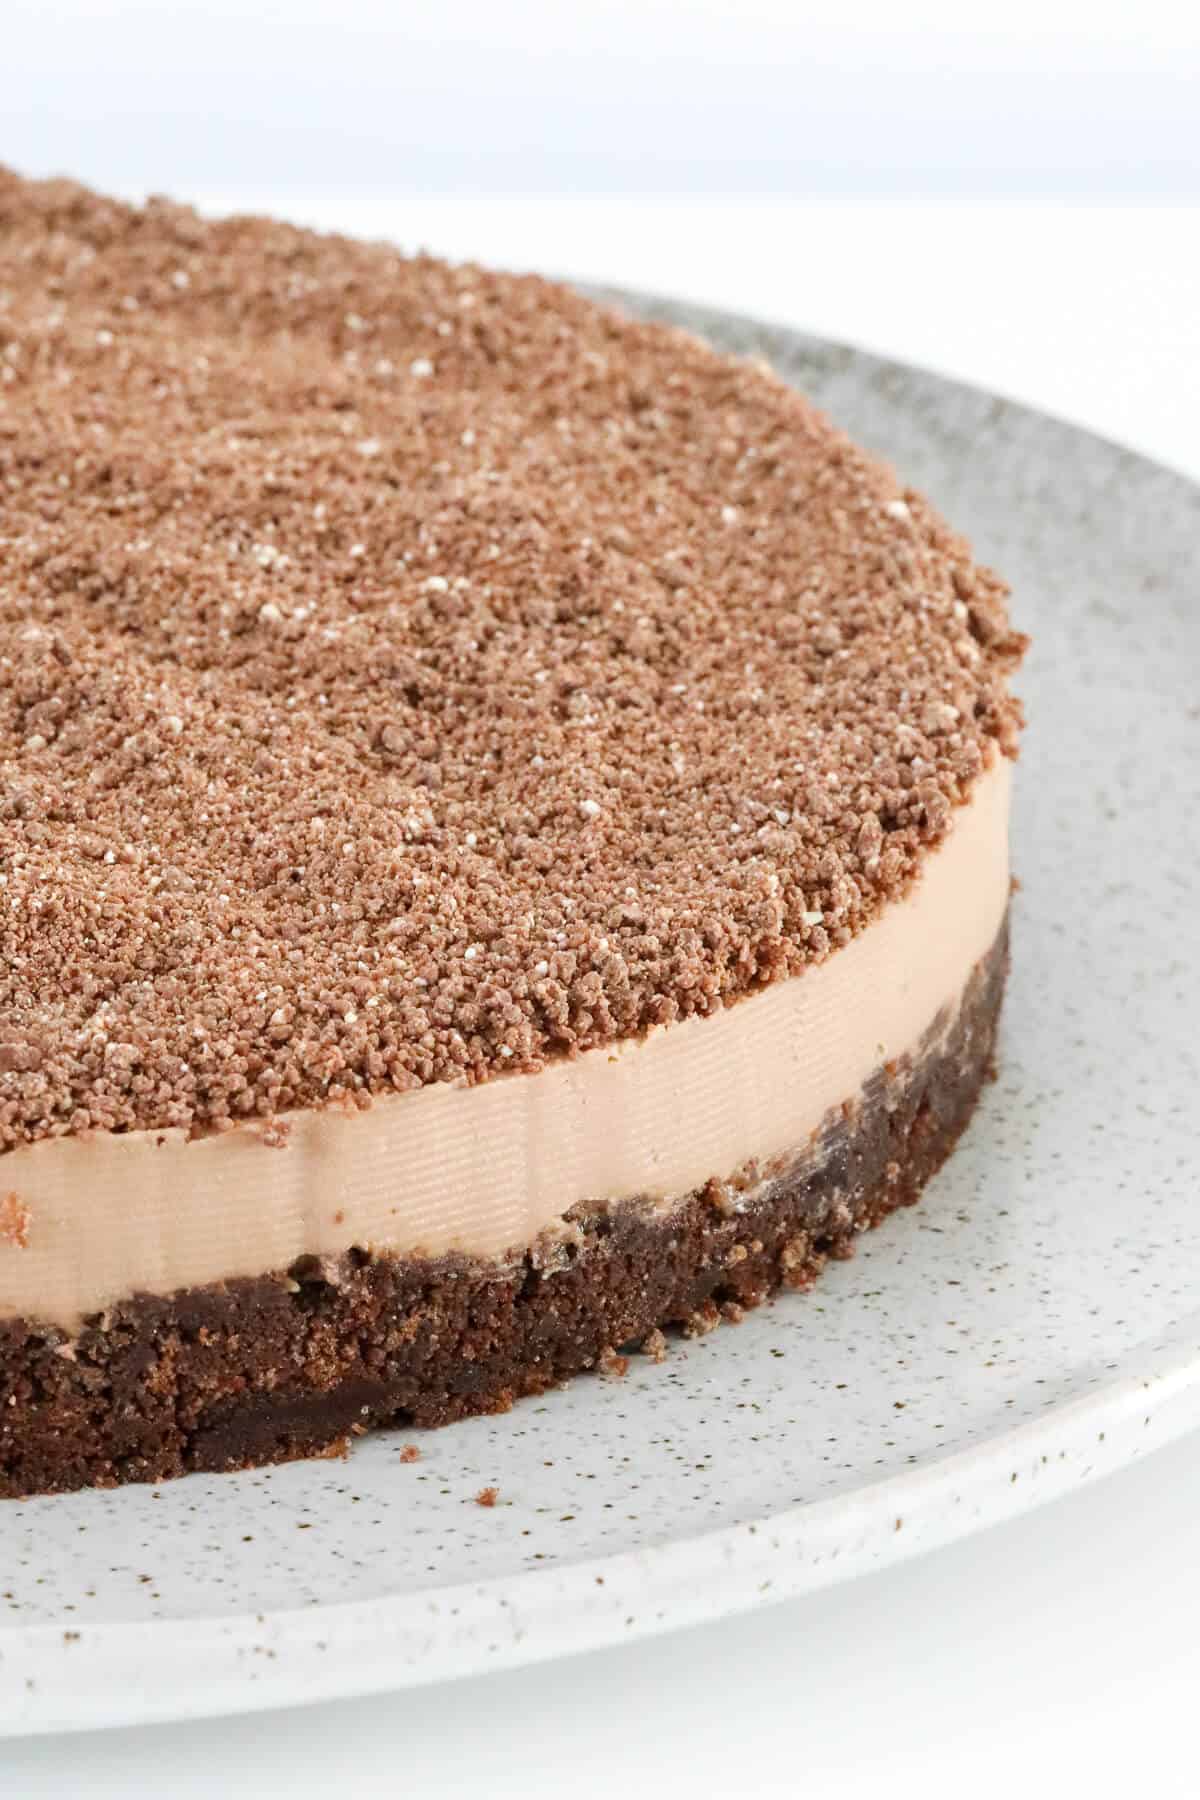 A close up of a chocolate cheesecake topped with grated Toblerone chocolate.